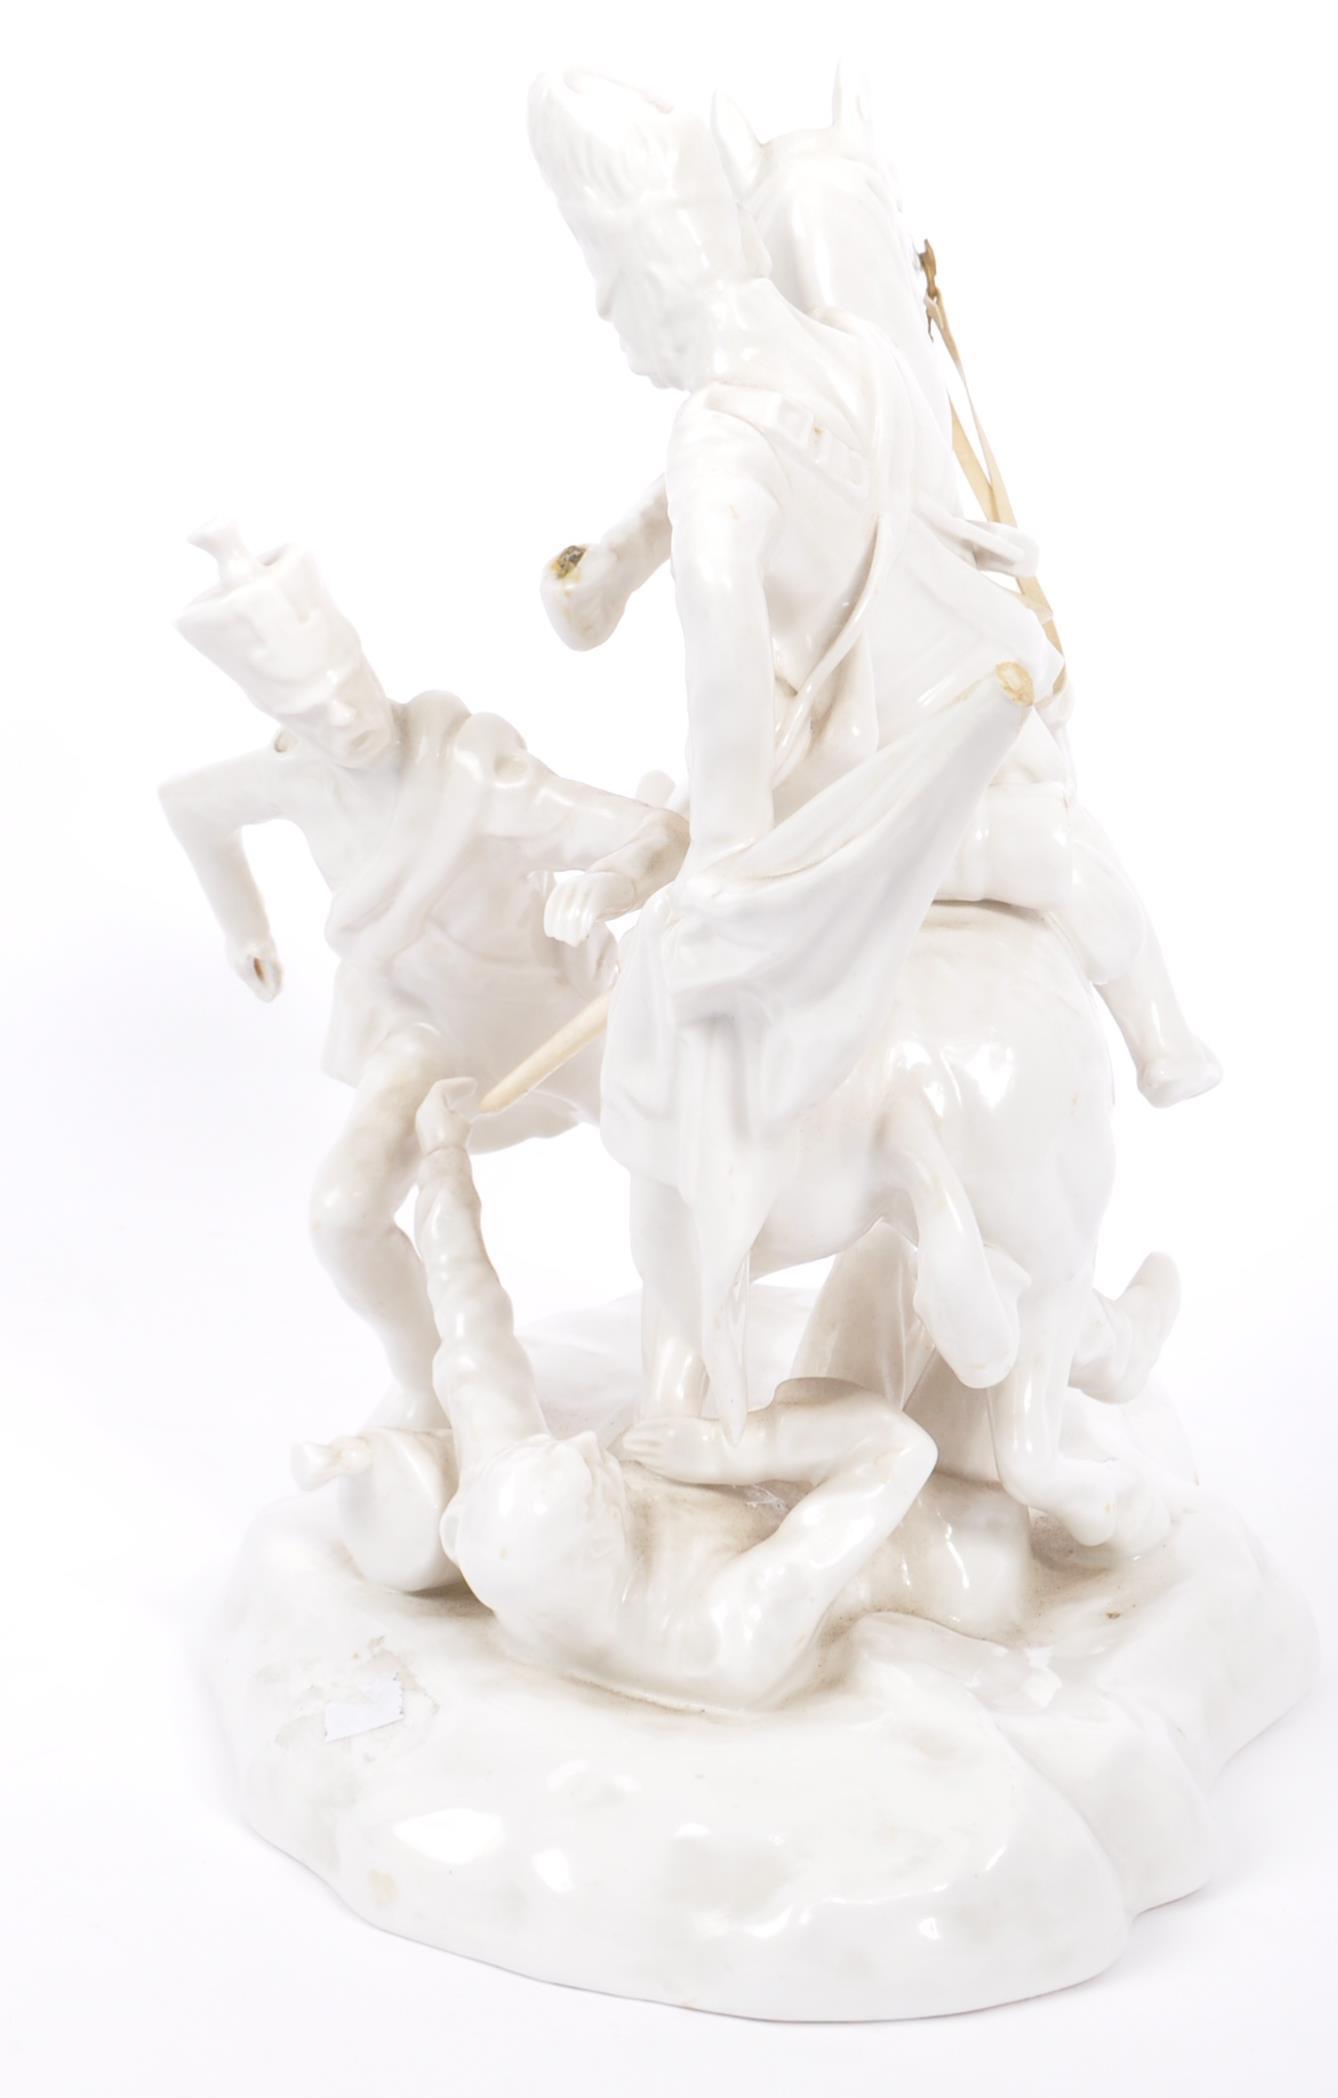 MICHAEL SUTTY PORCELAIN MILITARY FIGURE - FACTORY PROTOTYPE - Image 3 of 5